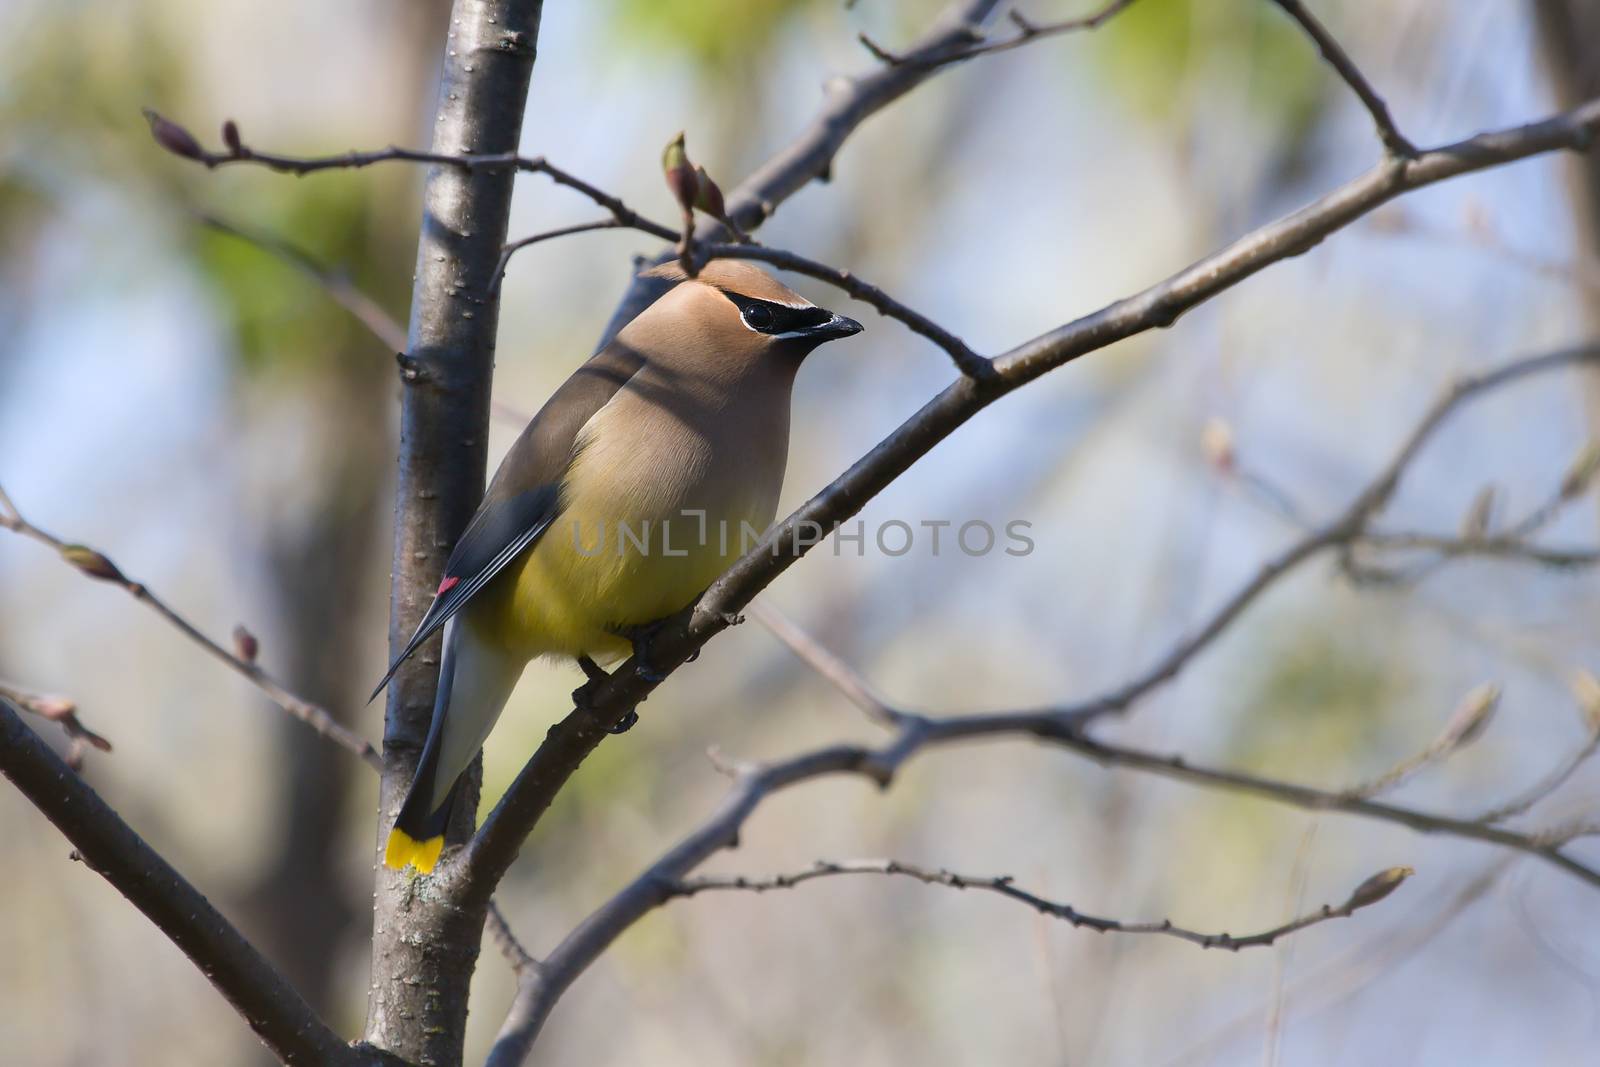 Cedar Waxwing perched on a branch.